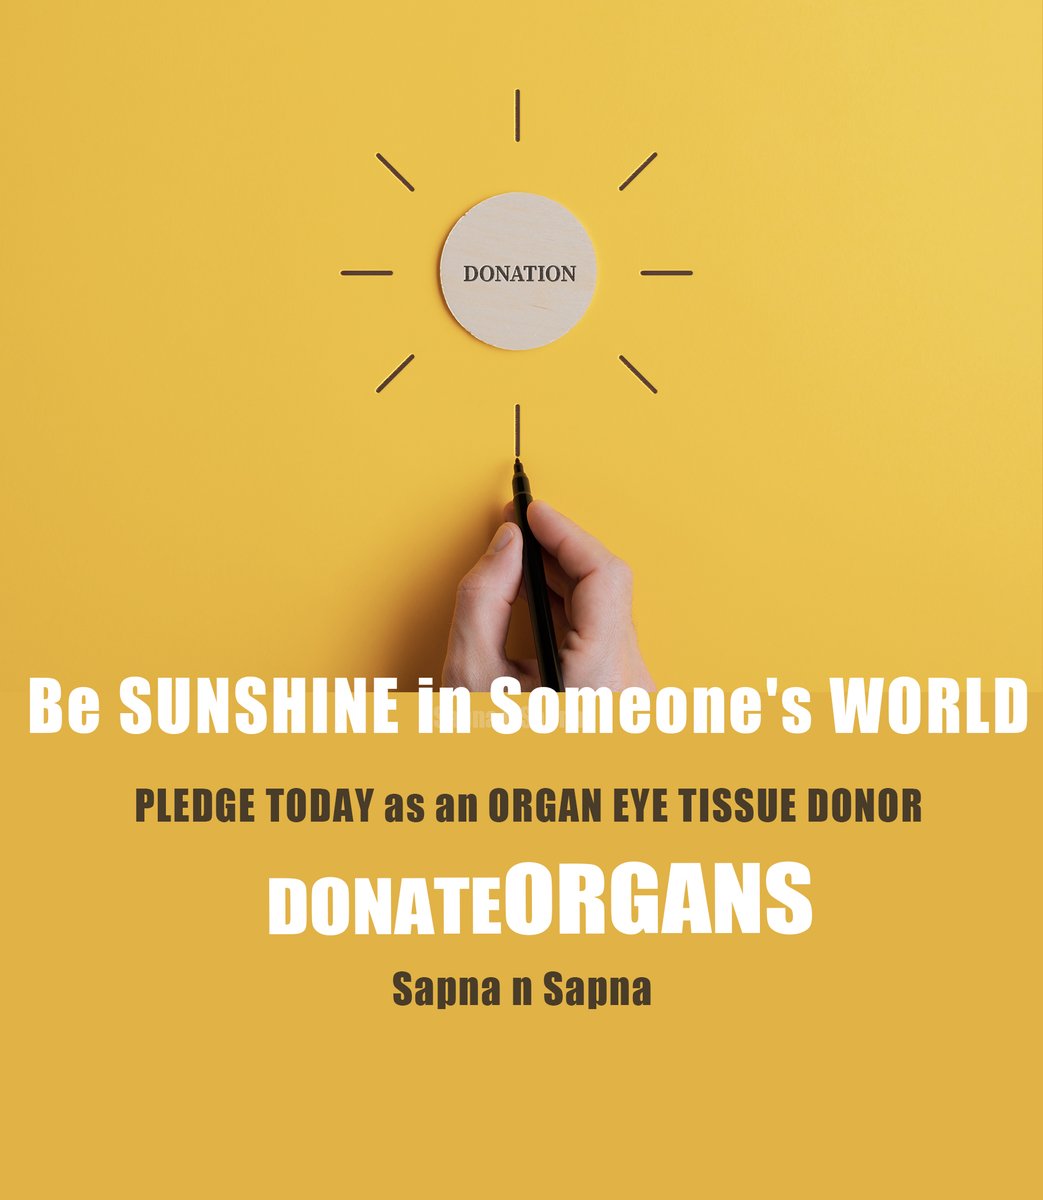 By choosing to be an organ, eye, and tissue donor, you can make a big difference in the lives of others. Your decision means that after you pass away, your organs can be used to save or improve someone else's life🇮🇳
#DonateOrganSaveLife #donateblood #donateeyes